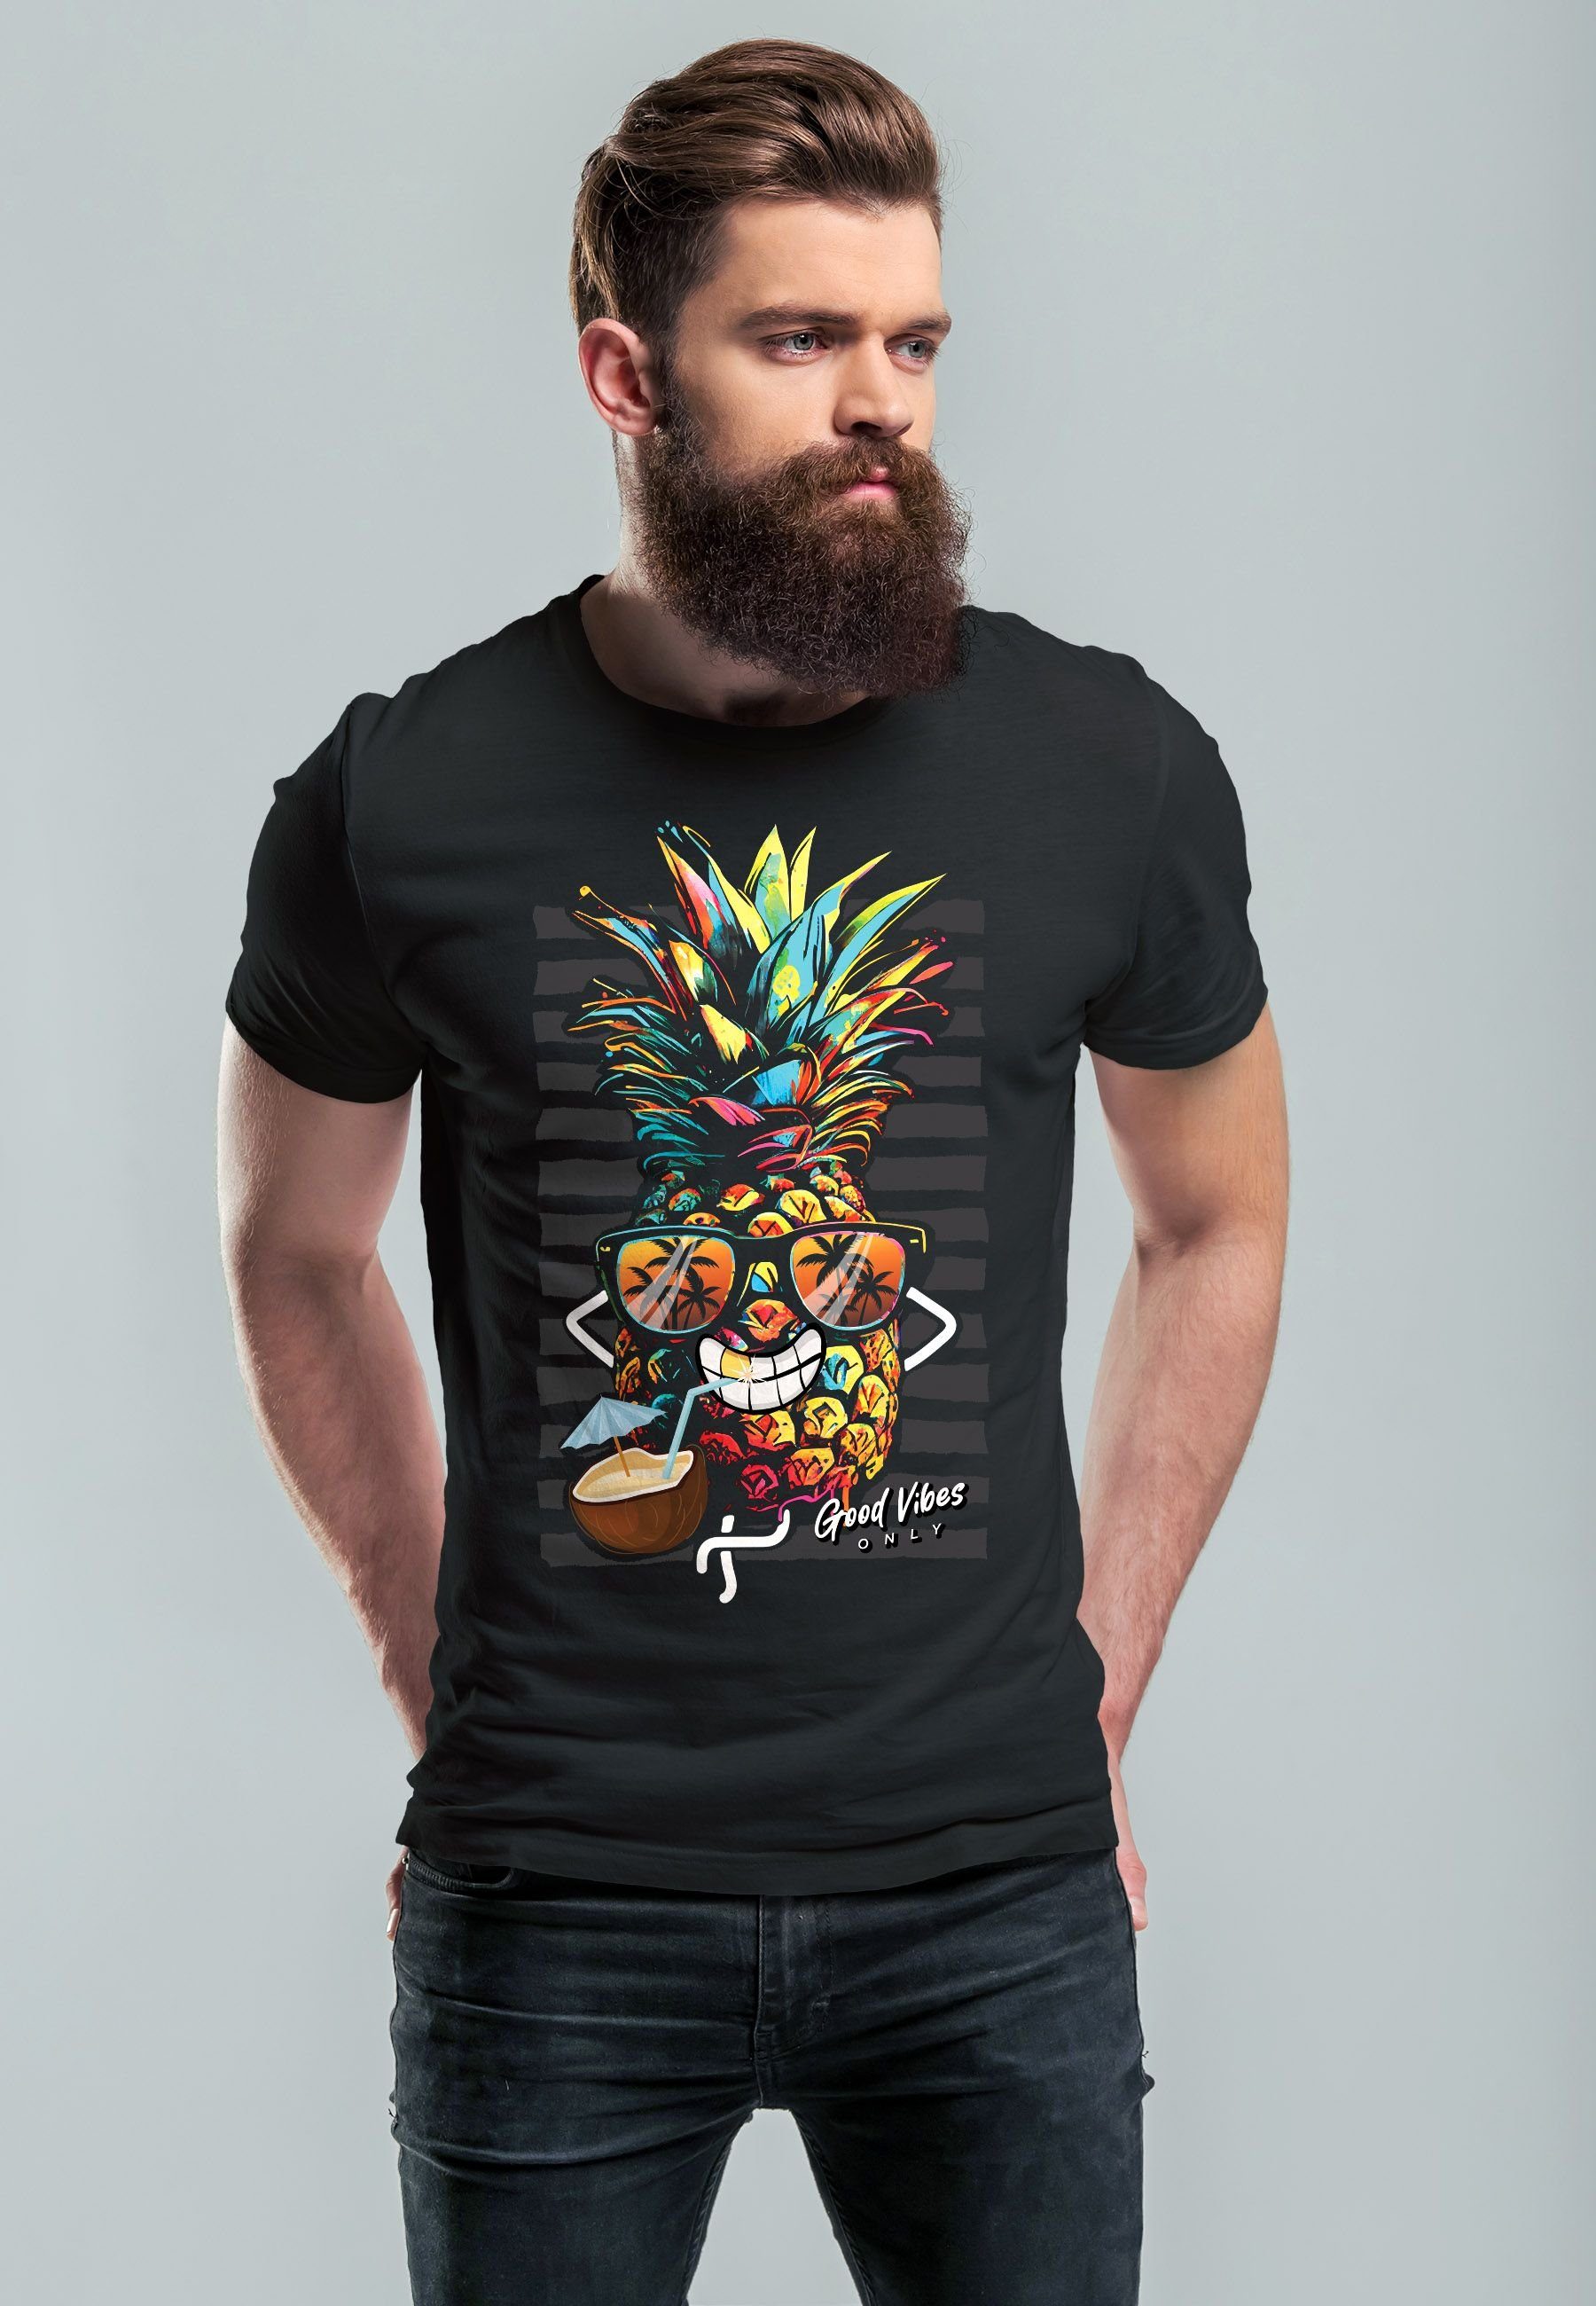 Neverless Print-Shirt Vibes Print Herren T-Shirt mit Good S Party Sonne Fashion Sommer Ananas Cocktail